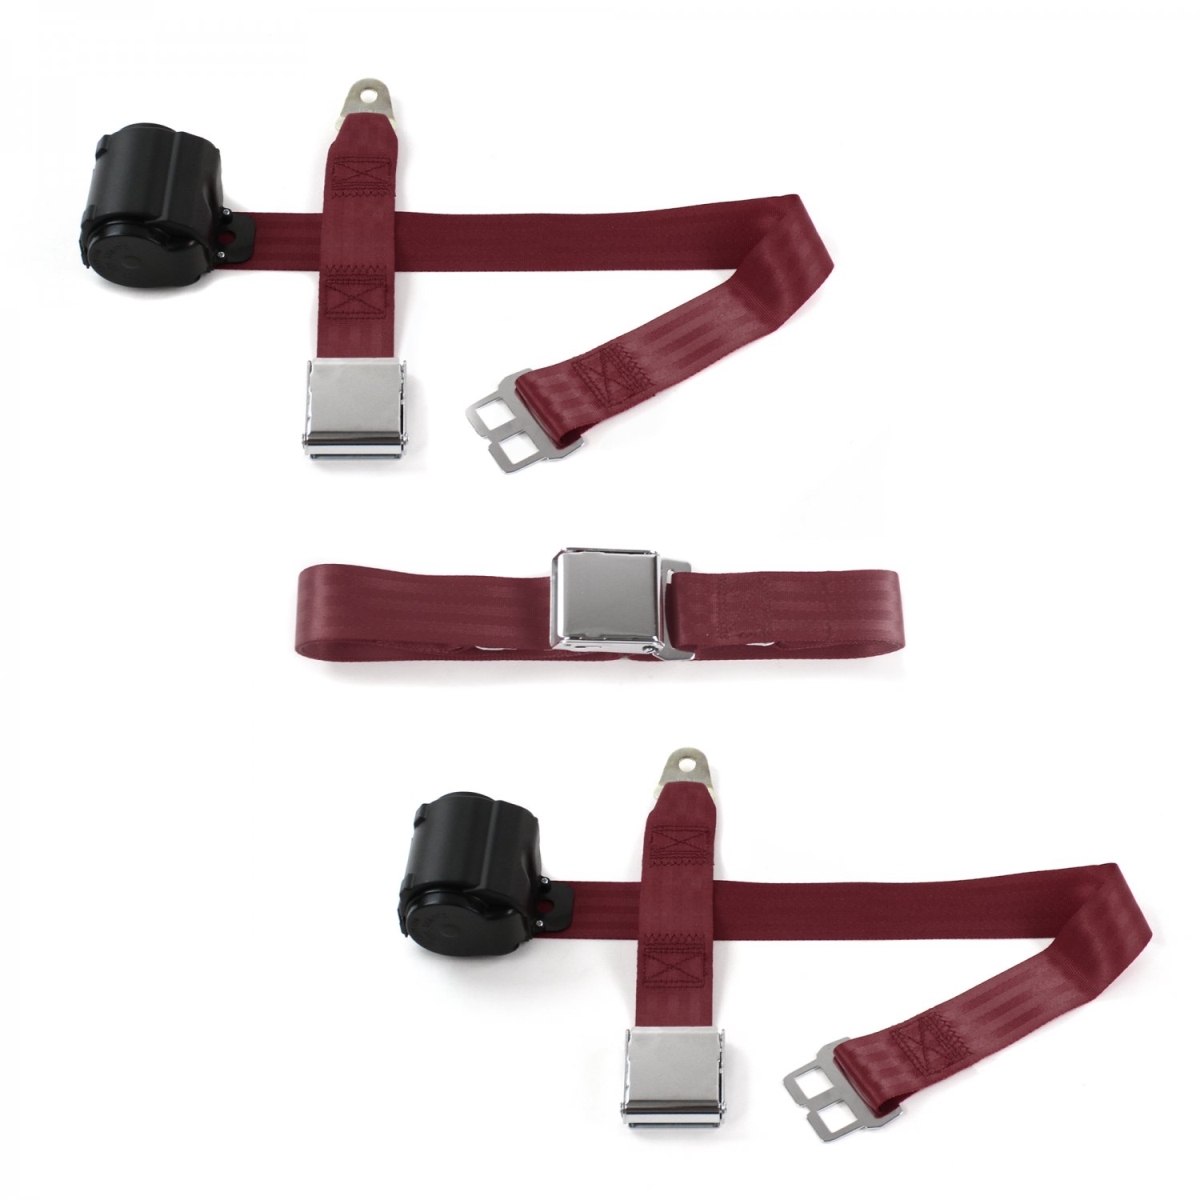 667191 Ford Thunderbird 1955-1957 Airplane 2 Point Burgandy Retractable Bench Seat Belt Kit - 3 Belts -  safeTboy